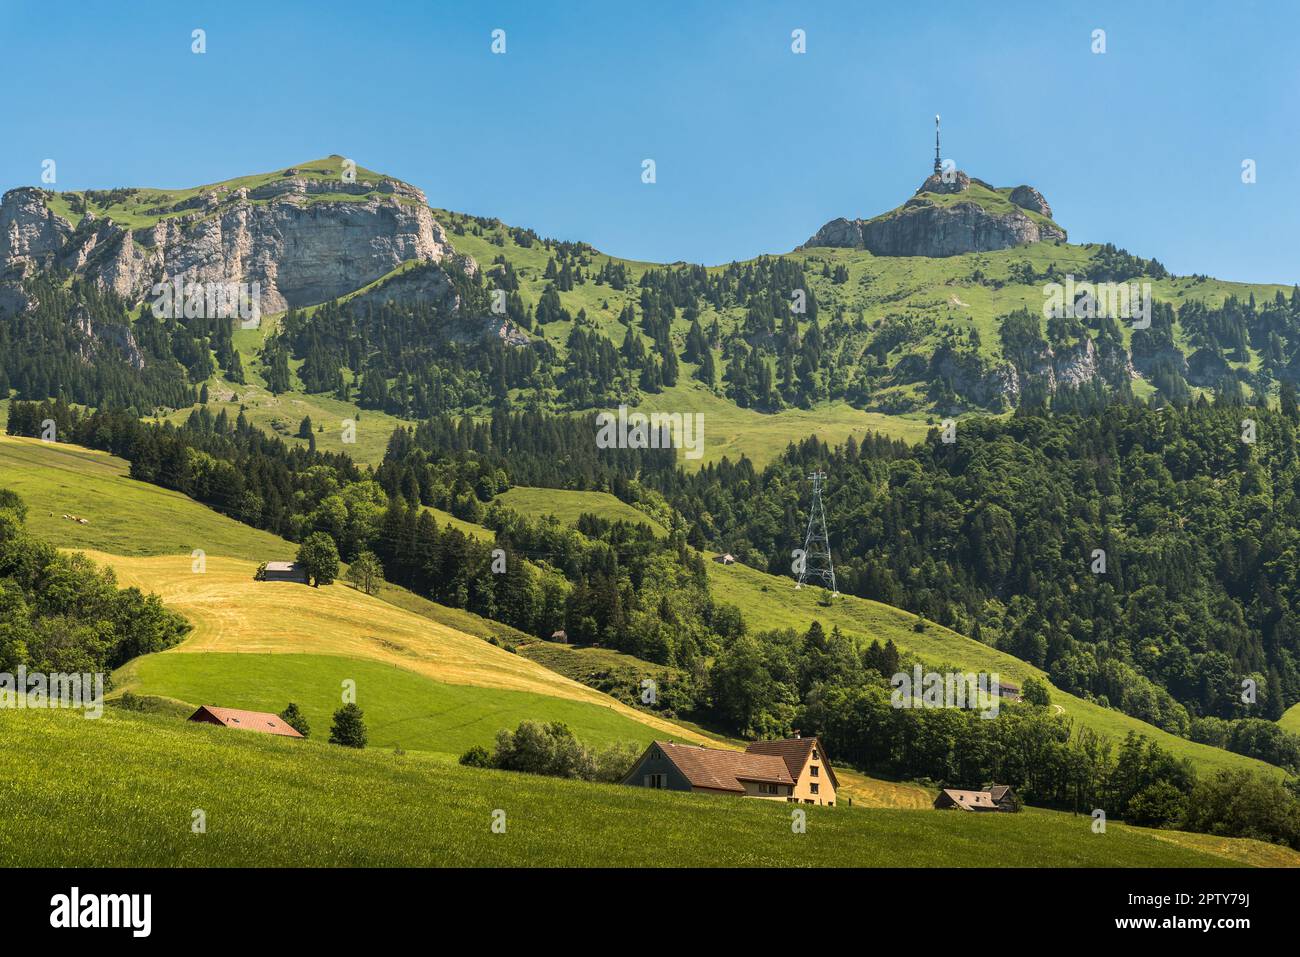 Landscape in the Appenzell Alps with green pastures and meadows, view to Mt. Hoher Kasten, Bruelisau, Canton Appenzell Innerrhoden, Switzerland Stock Photo